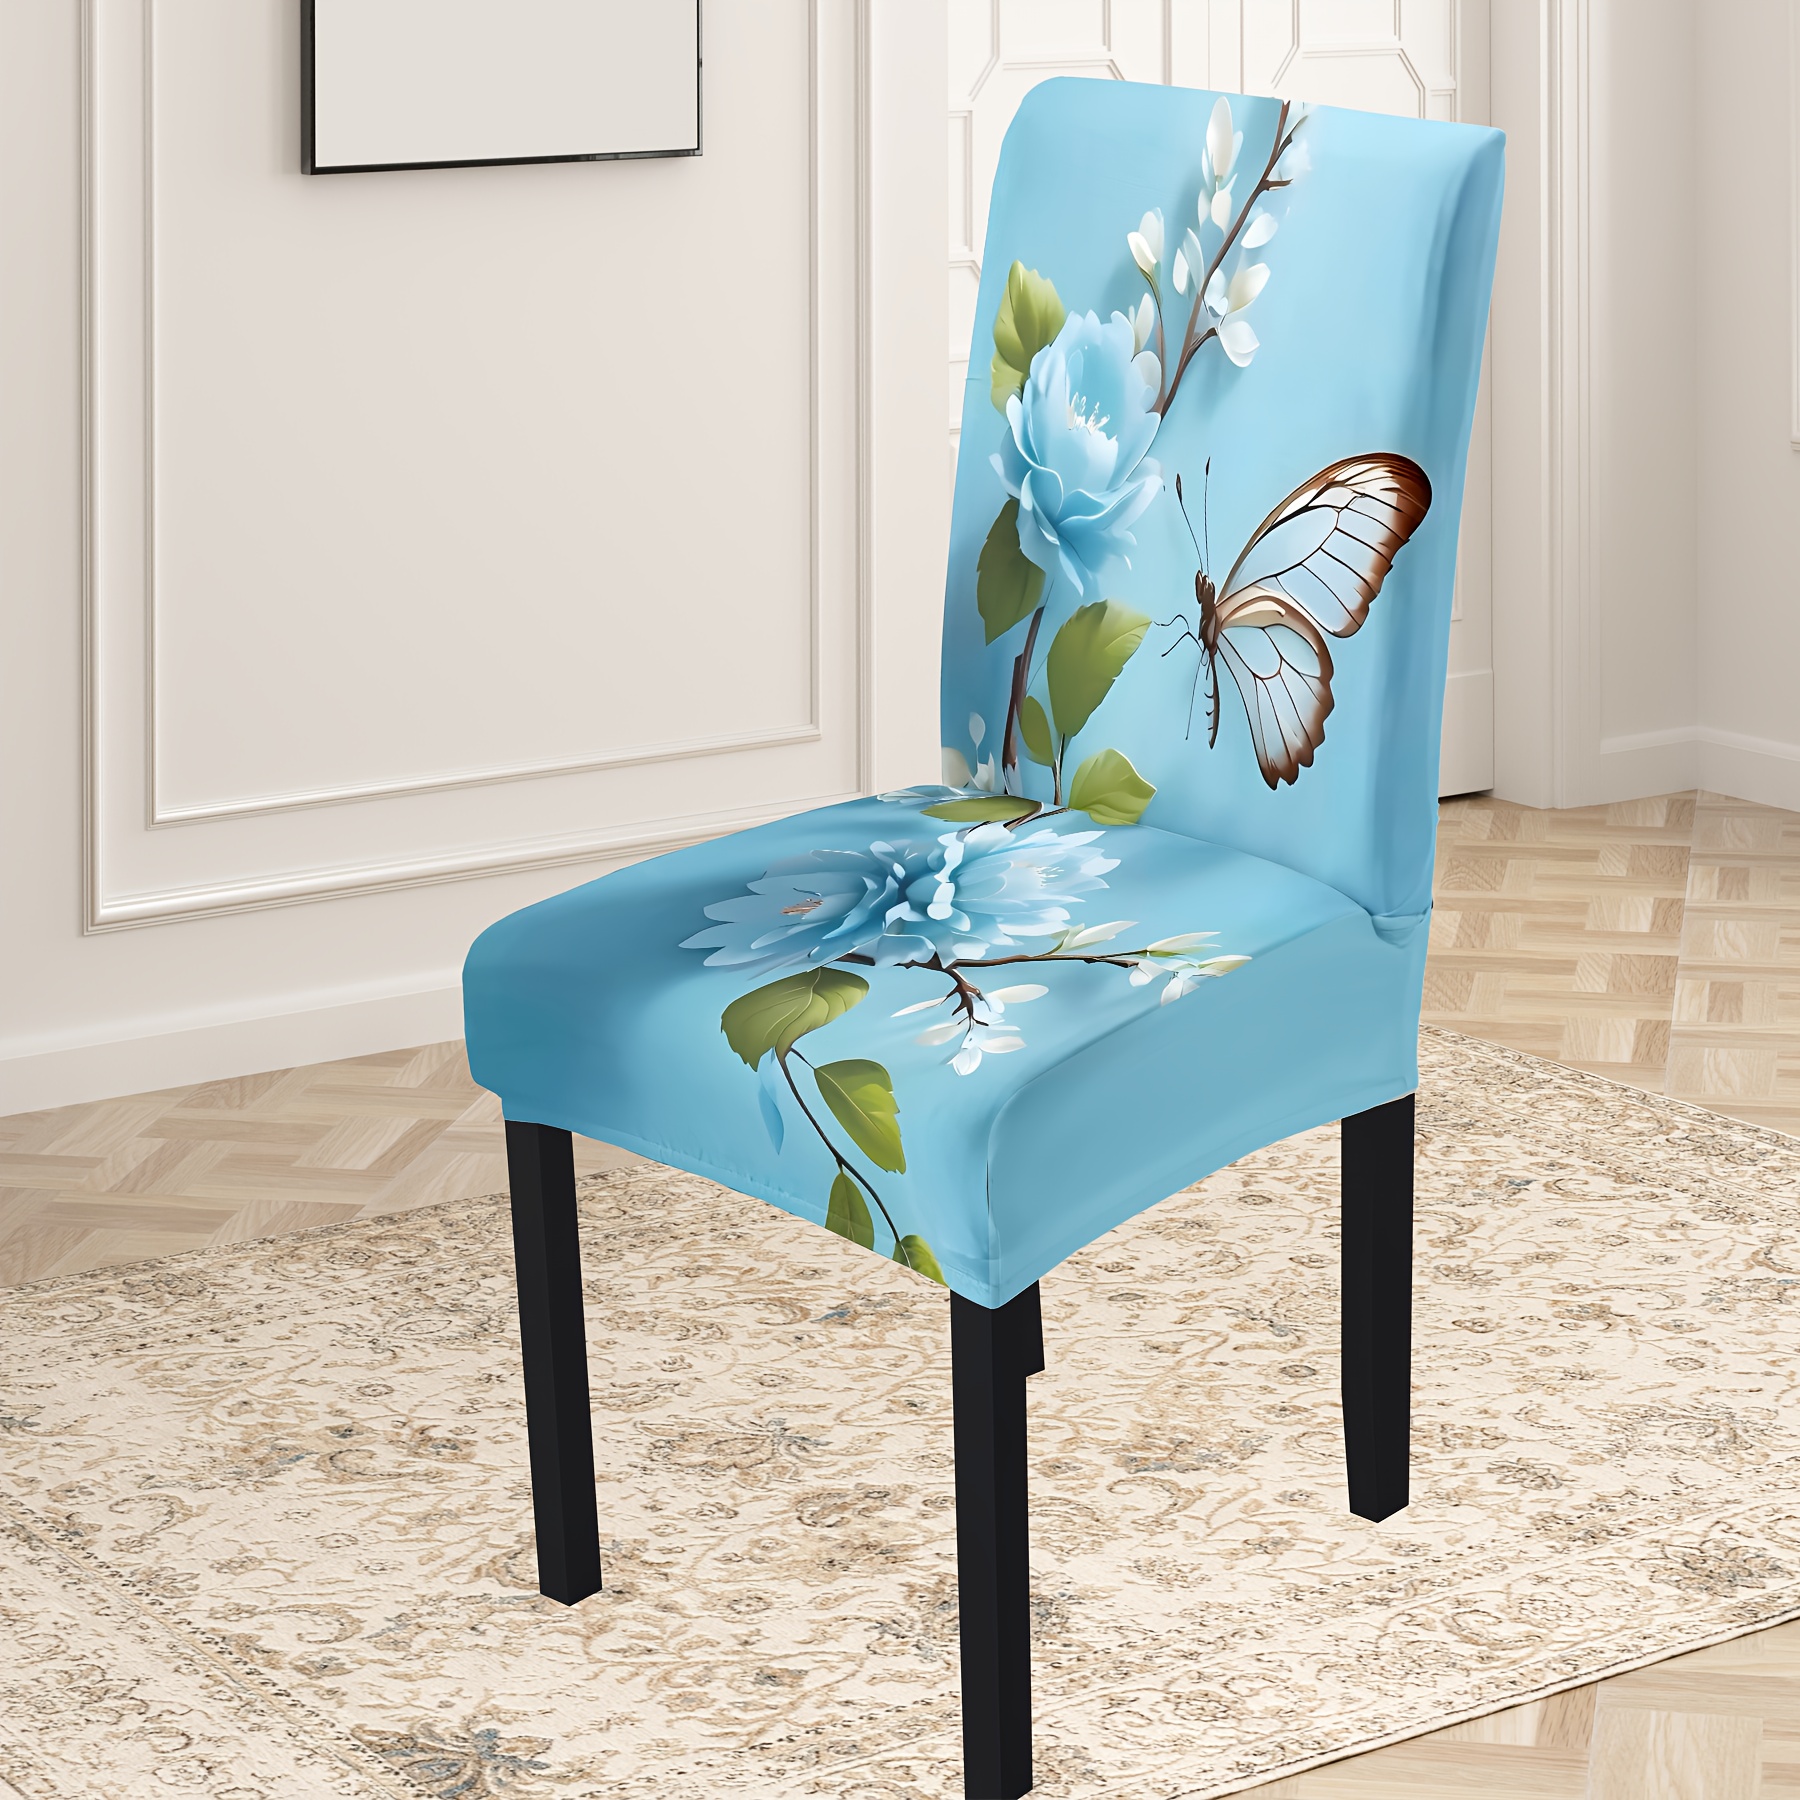 

4/6pcs Elegant Blue Rose & Butterfly Print Chair Covers - Stretchable Slipcovers For Kitchen, Living Room, Hotel, And Party Decor